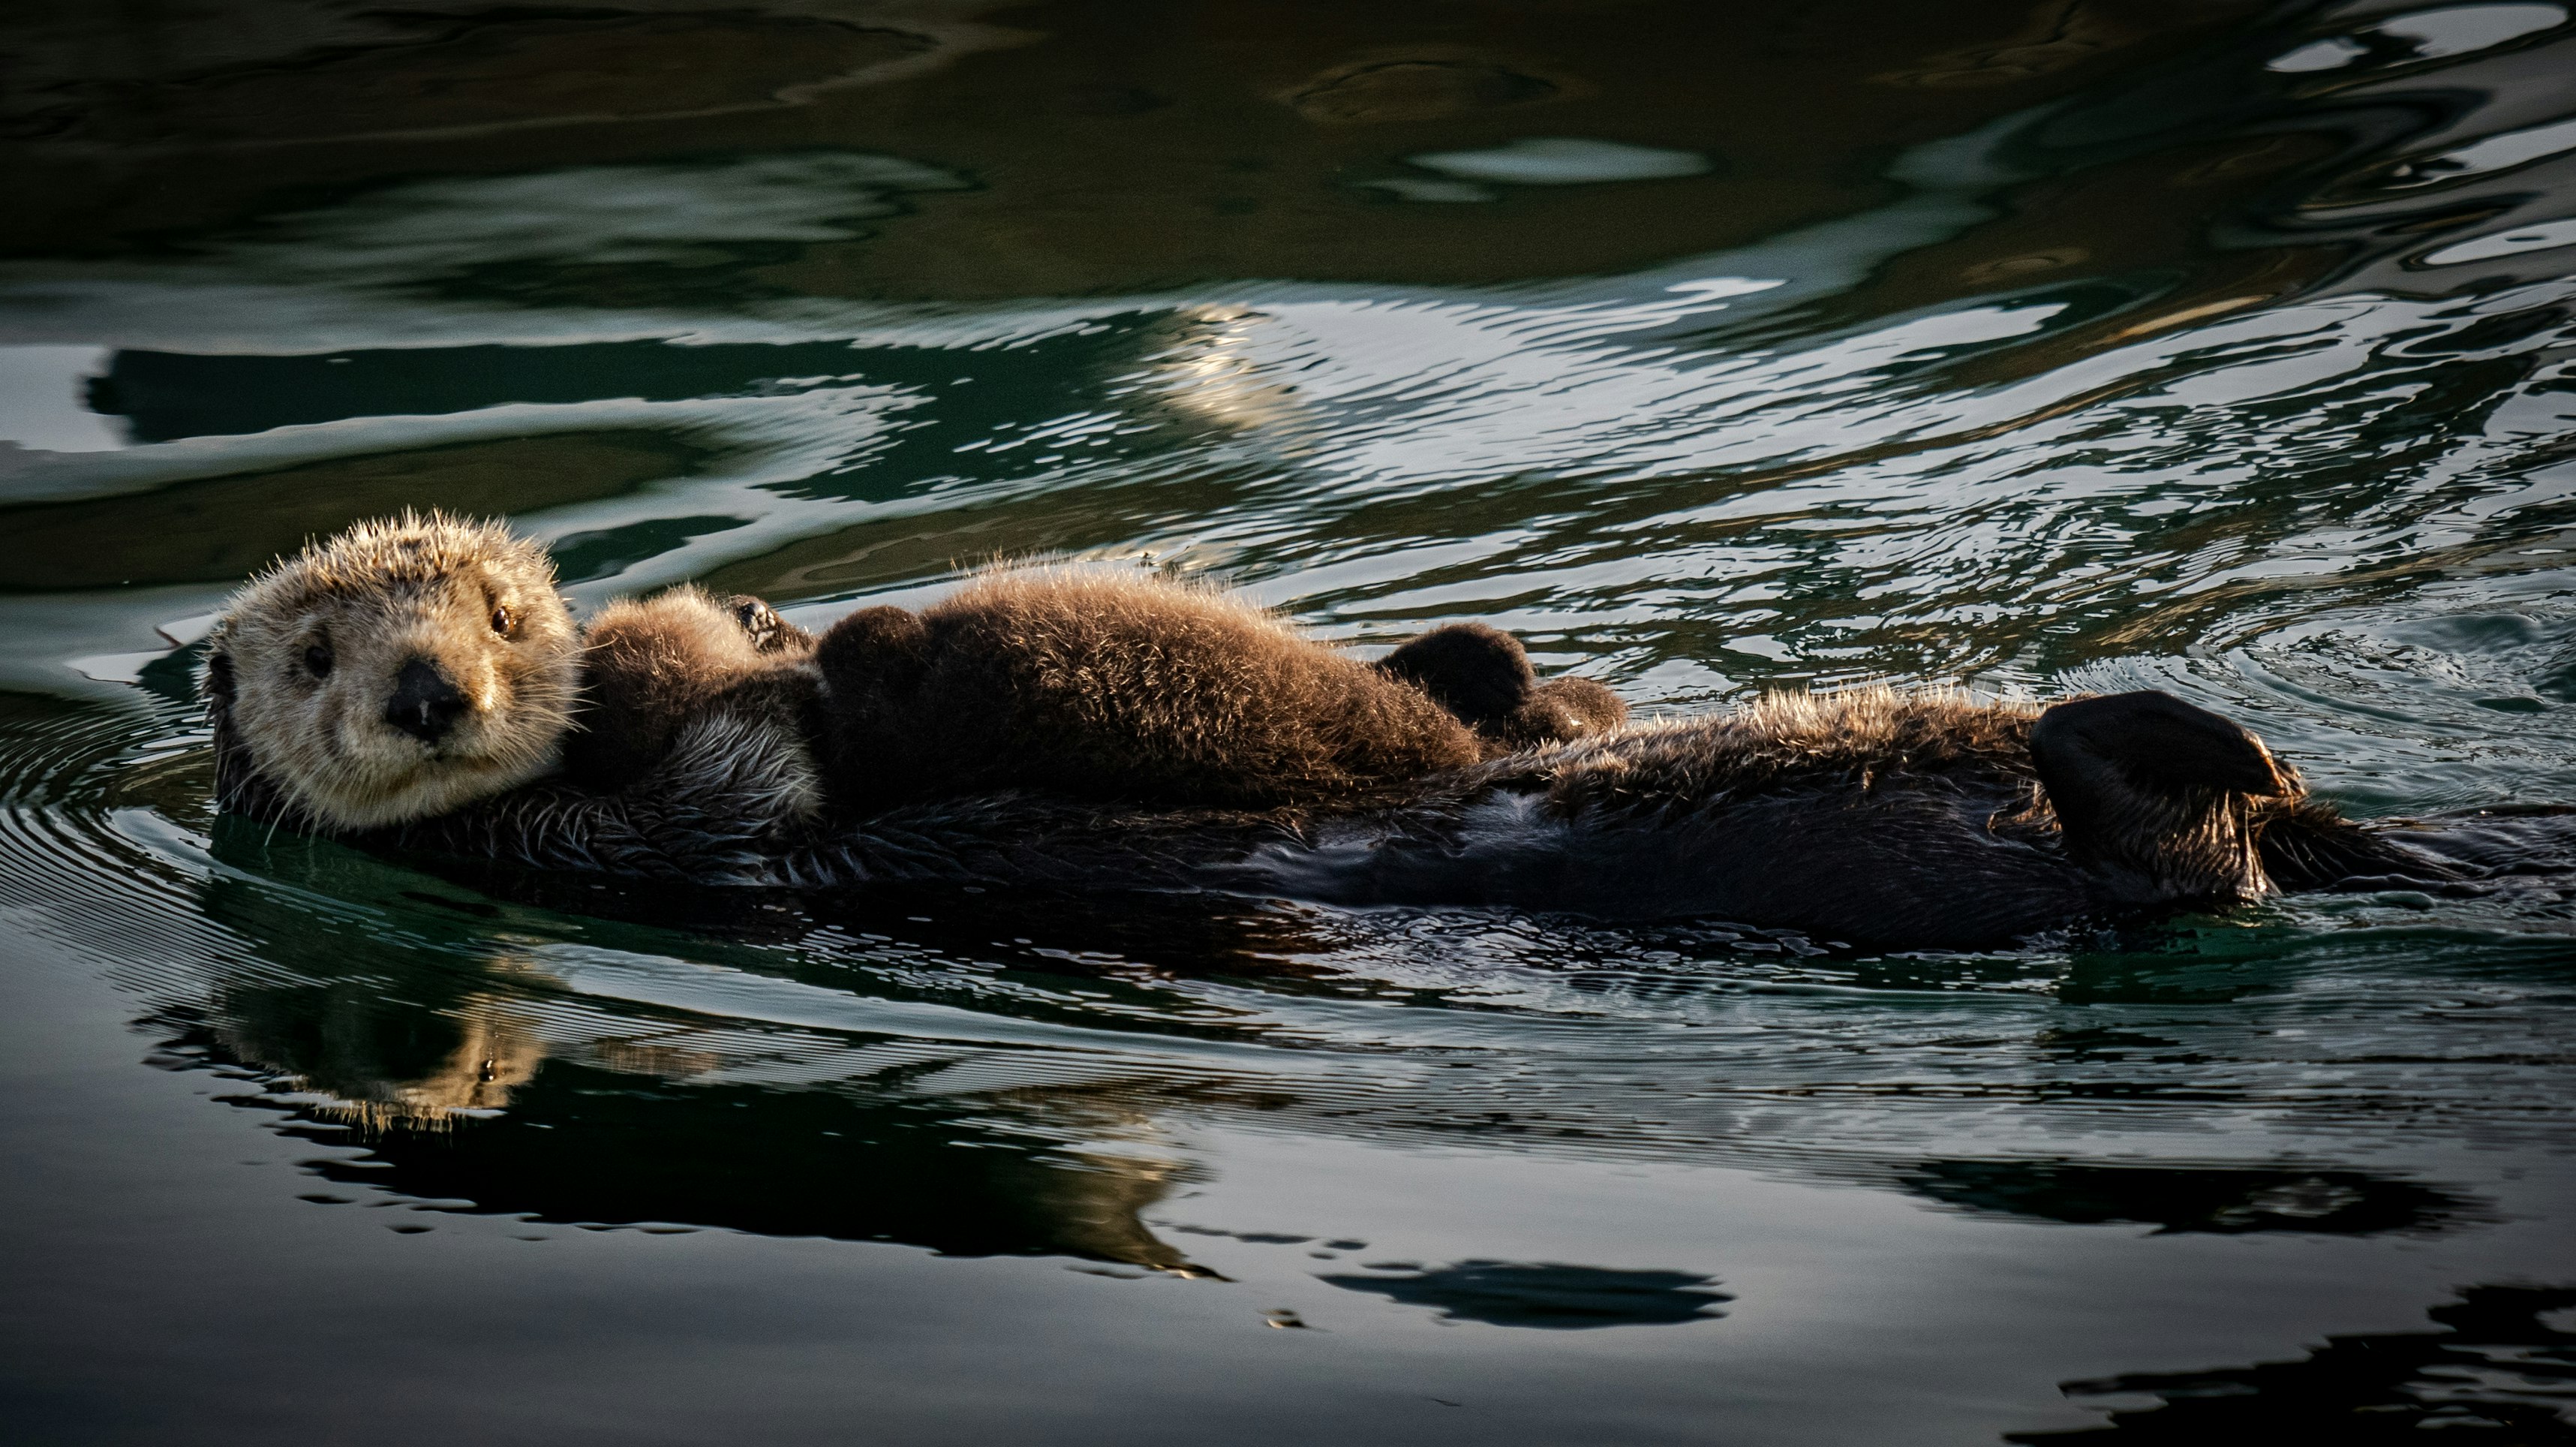 How Sea Otters Help Protect Underwater Meadows